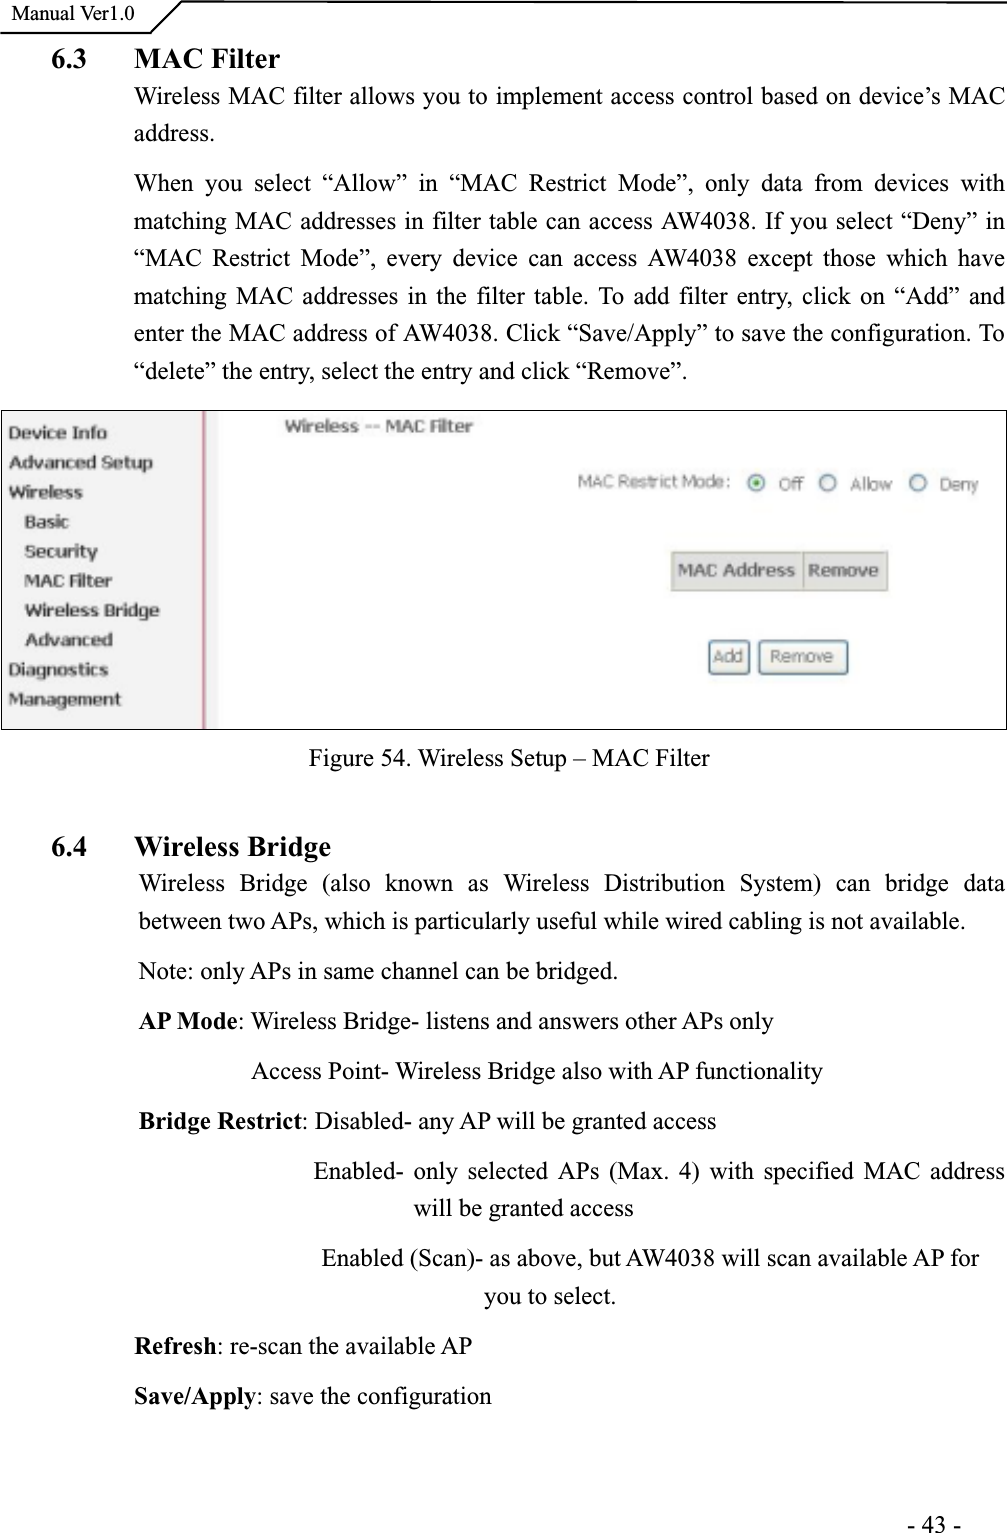  Manual Ver1.06.3 MAC FilterWireless MAC filter allows you to implement access control based on device’s MAC address.When you select “Allow” in “MAC Restrict Mode”, only data from devices with matching MAC addresses in filter table can access AW4038. If you select “Deny” in “MAC Restrict Mode”, every device can access AW4038 except those which have matching MAC addresses in the filter table. To add filter entry, click on “Add” and enter the MAC address of AW4038. Click “Save/Apply” to save the configuration. To“delete” the entry, select the entry and click “Remove”. Figure 54. Wireless Setup – MAC Filter 6.4 Wireless BridgeWireless Bridge (also known as Wireless Distribution System) can bridge data between two APs, which is particularly useful while wired cabling is not available. Note: only APs in same channel can be bridged. AP Mode: Wireless Bridge- listens and answers other APs only         Access Point- Wireless Bridge also with AP functionalityBridge Restrict: Disabled- any AP will be granted access               Enabled- only selected APs (Max. 4) with specified MAC address will be granted access                Enabled (Scan)- as above, but AW4038 will scan available AP foryou to select. Refresh: re-scan the available APSave/Apply: save the configuration                                                                      -43-